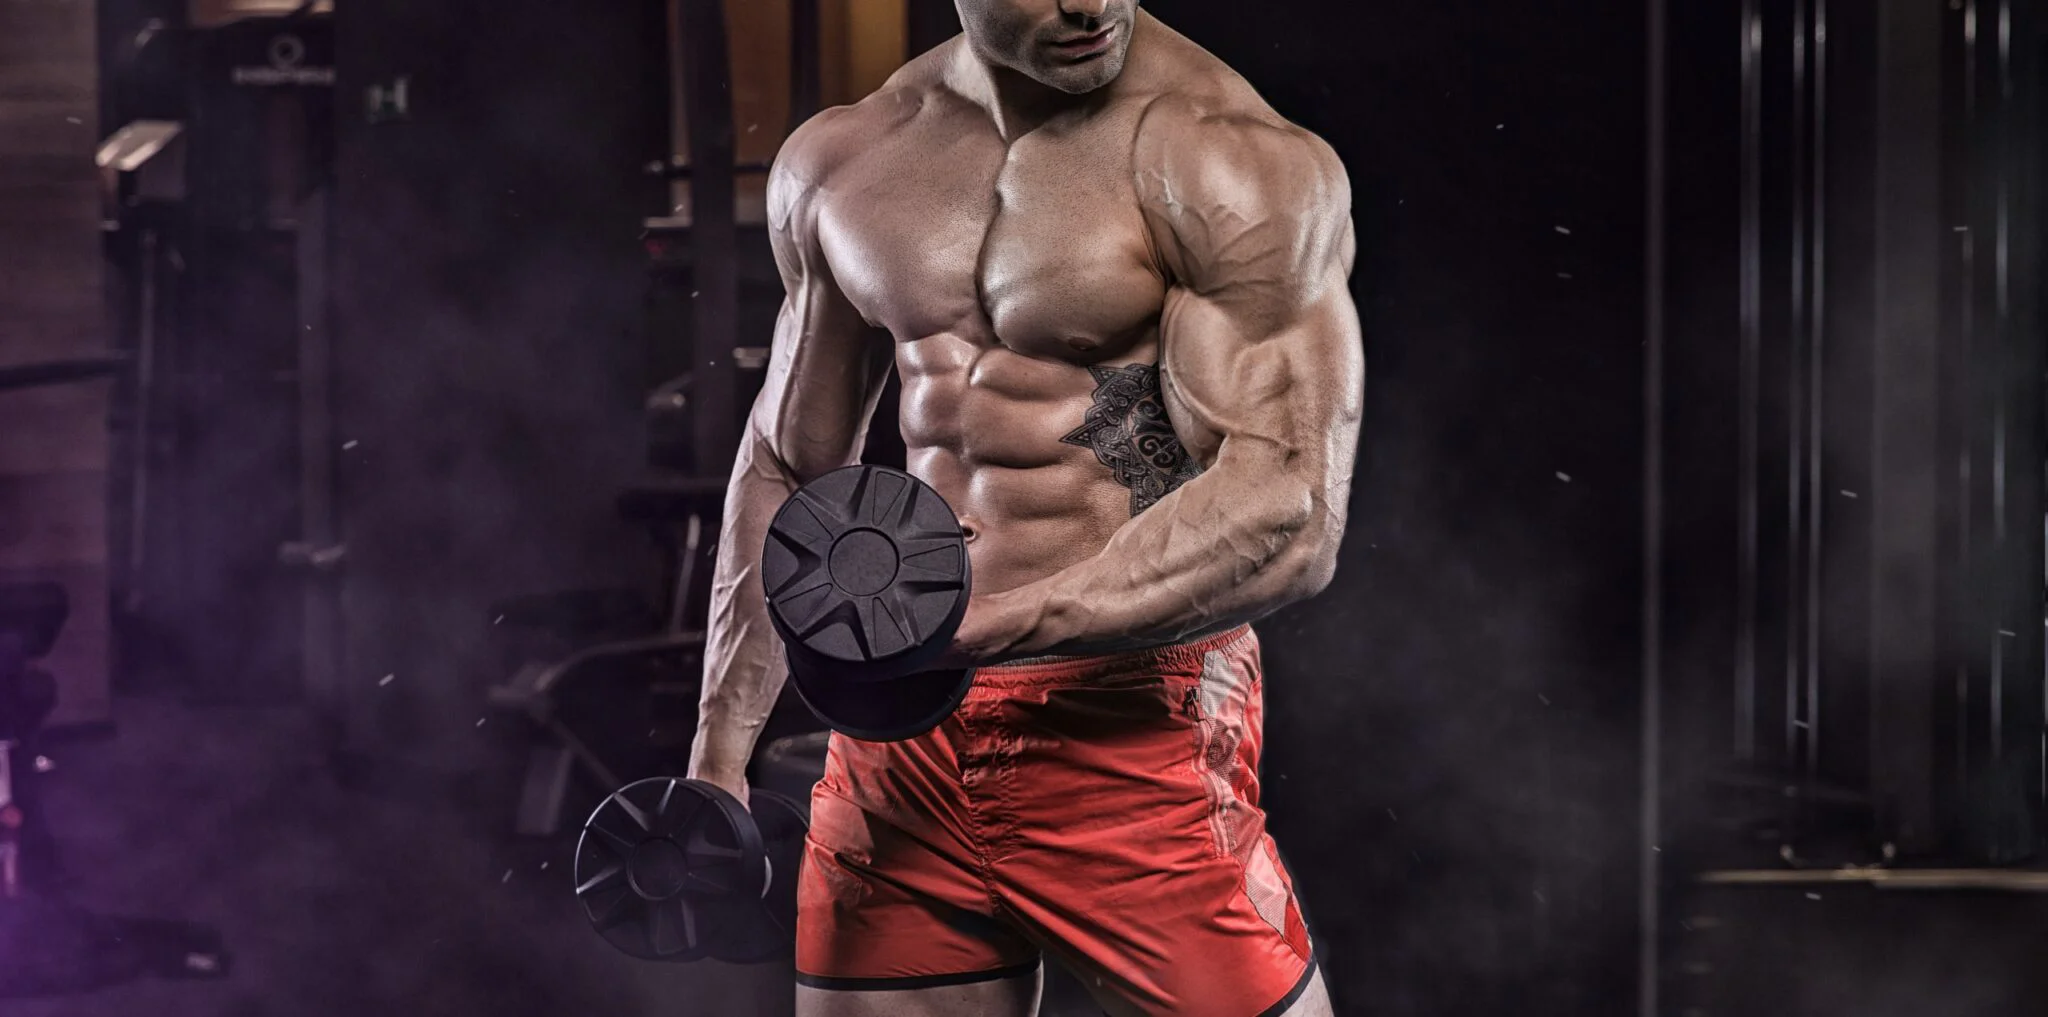 What are anabolic steroids?